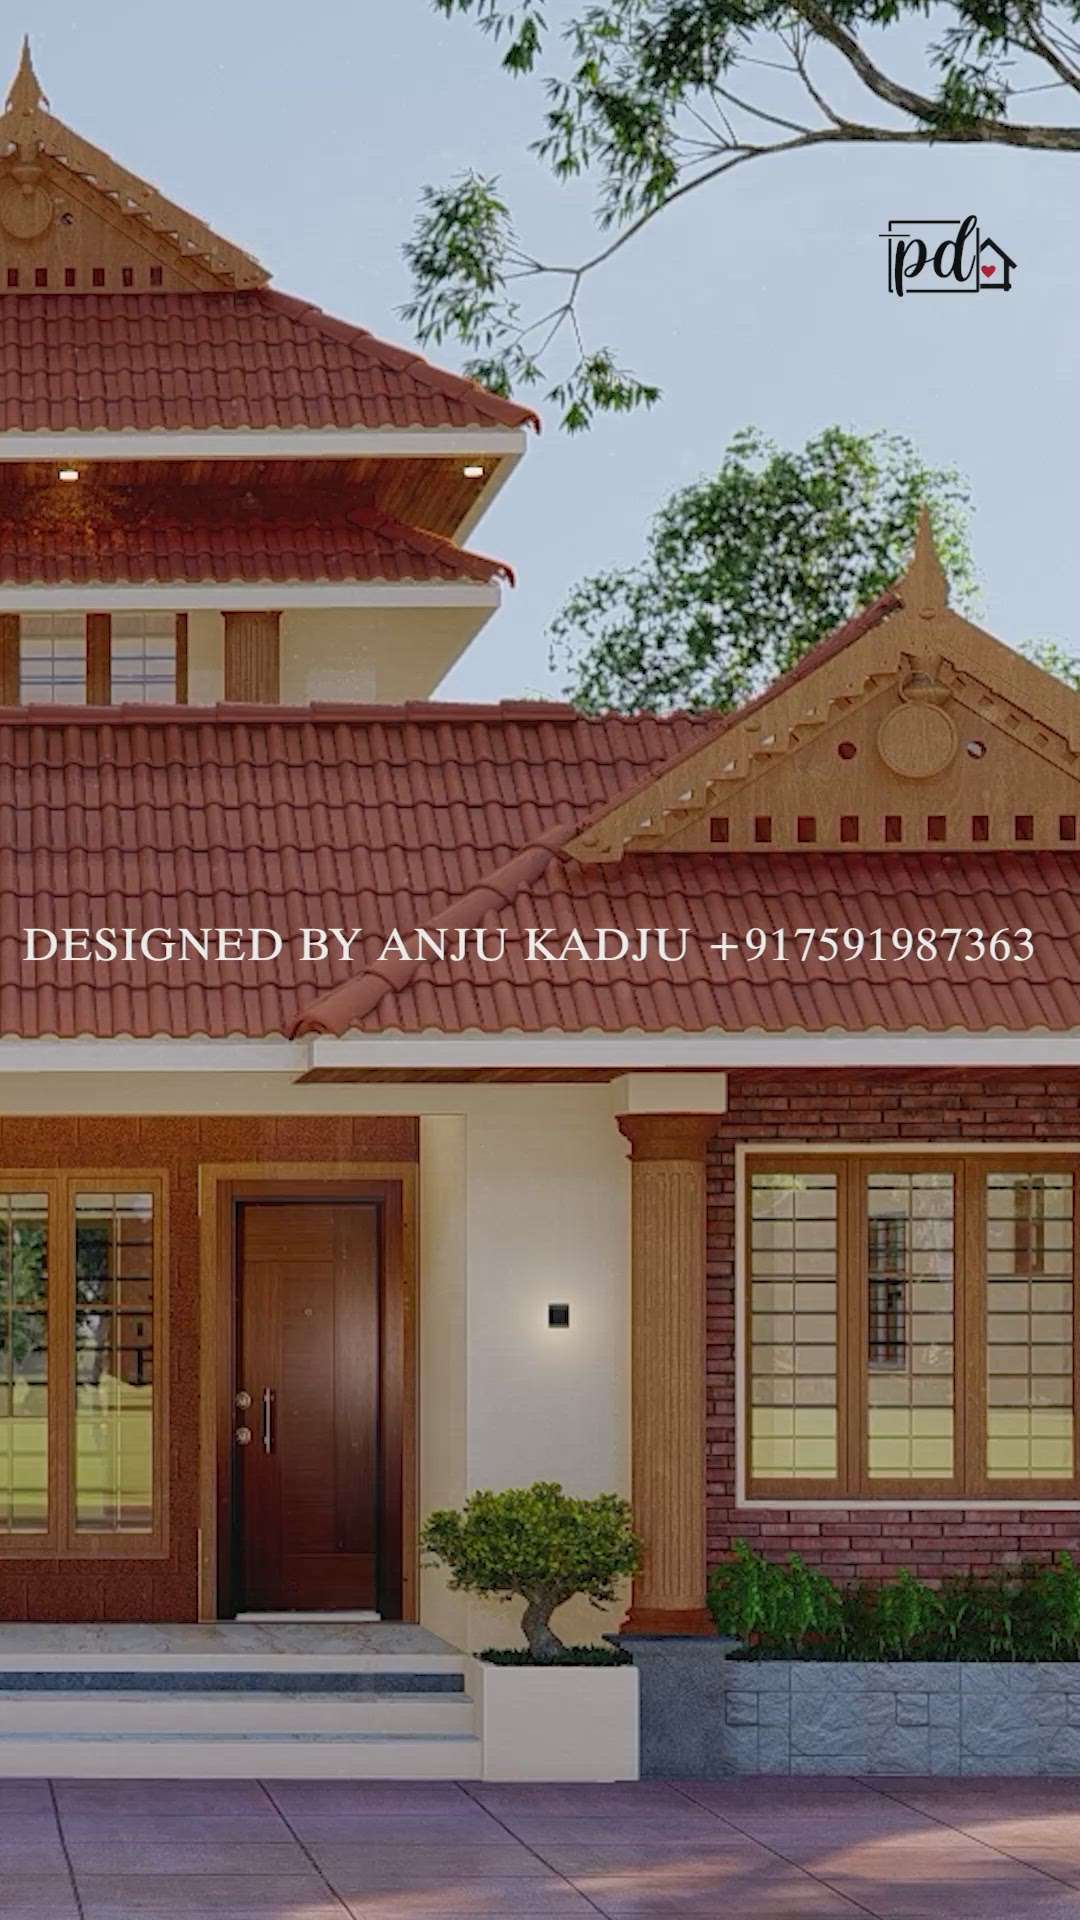 kerala traditional house design.
designed by anju kadju #TraditionalHouse  #tradition #KeralaStyleHouse #HouseDesigns